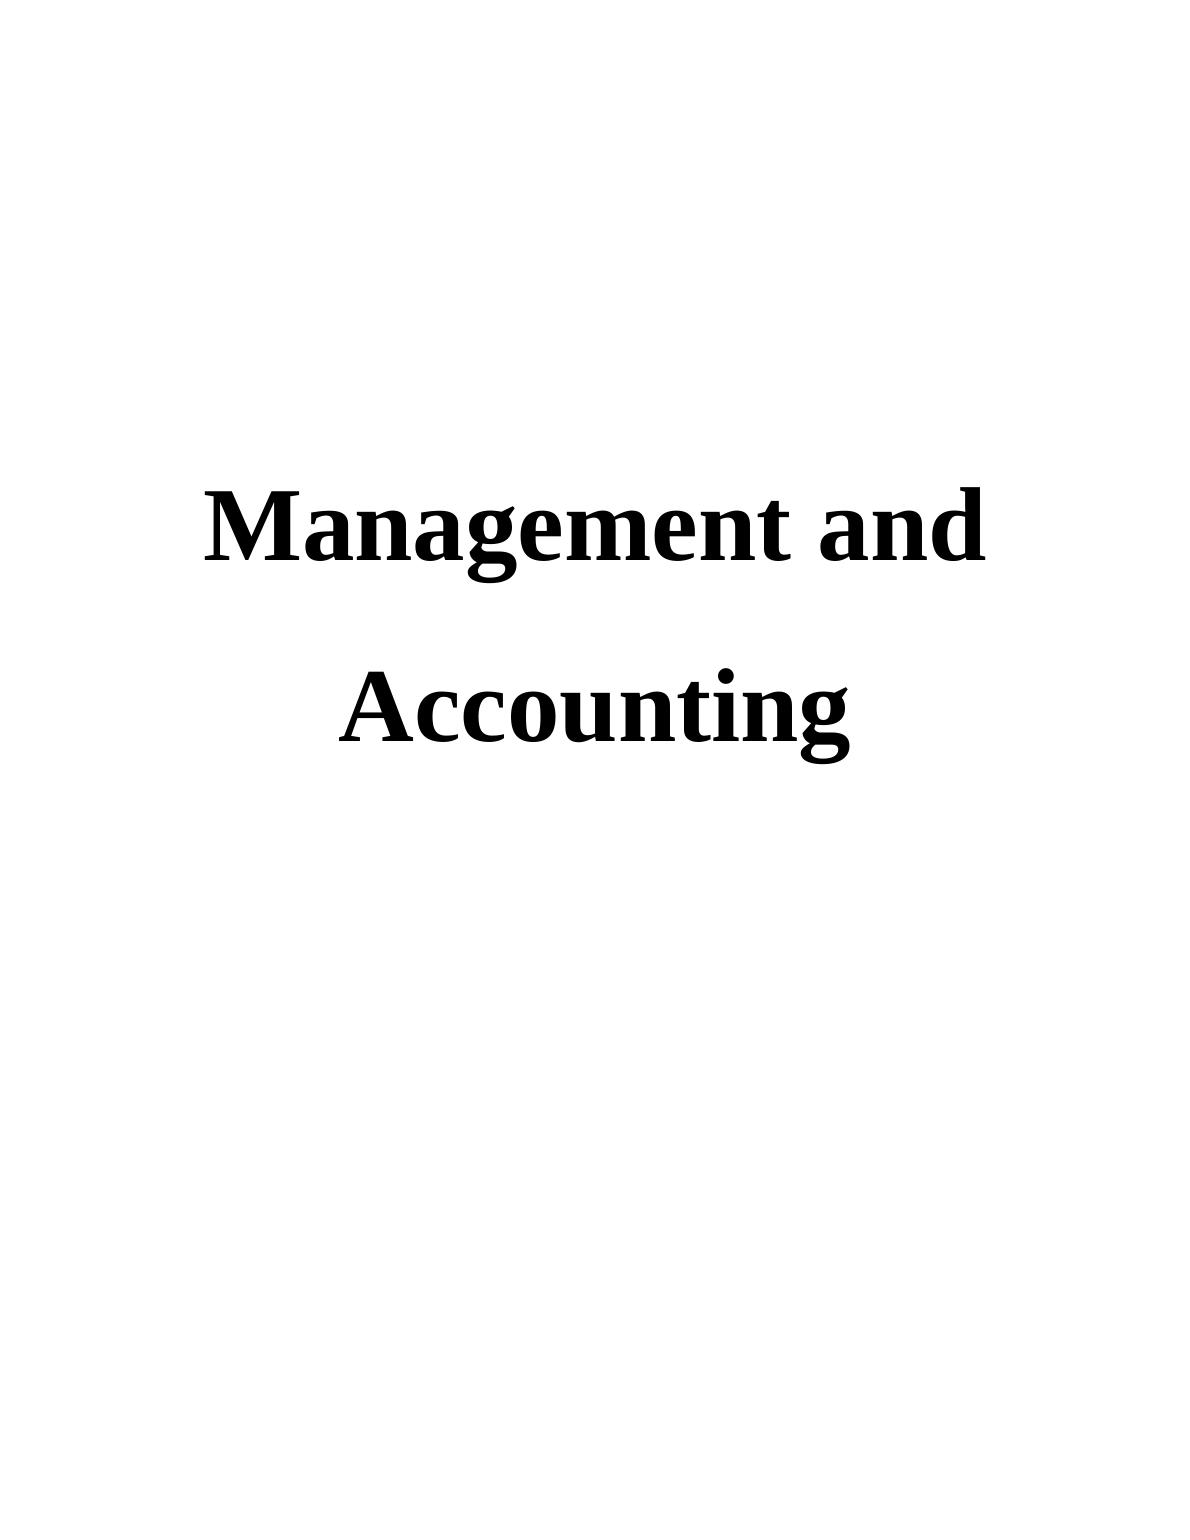 Management Accounting Assignment : Every joy enterprise_1